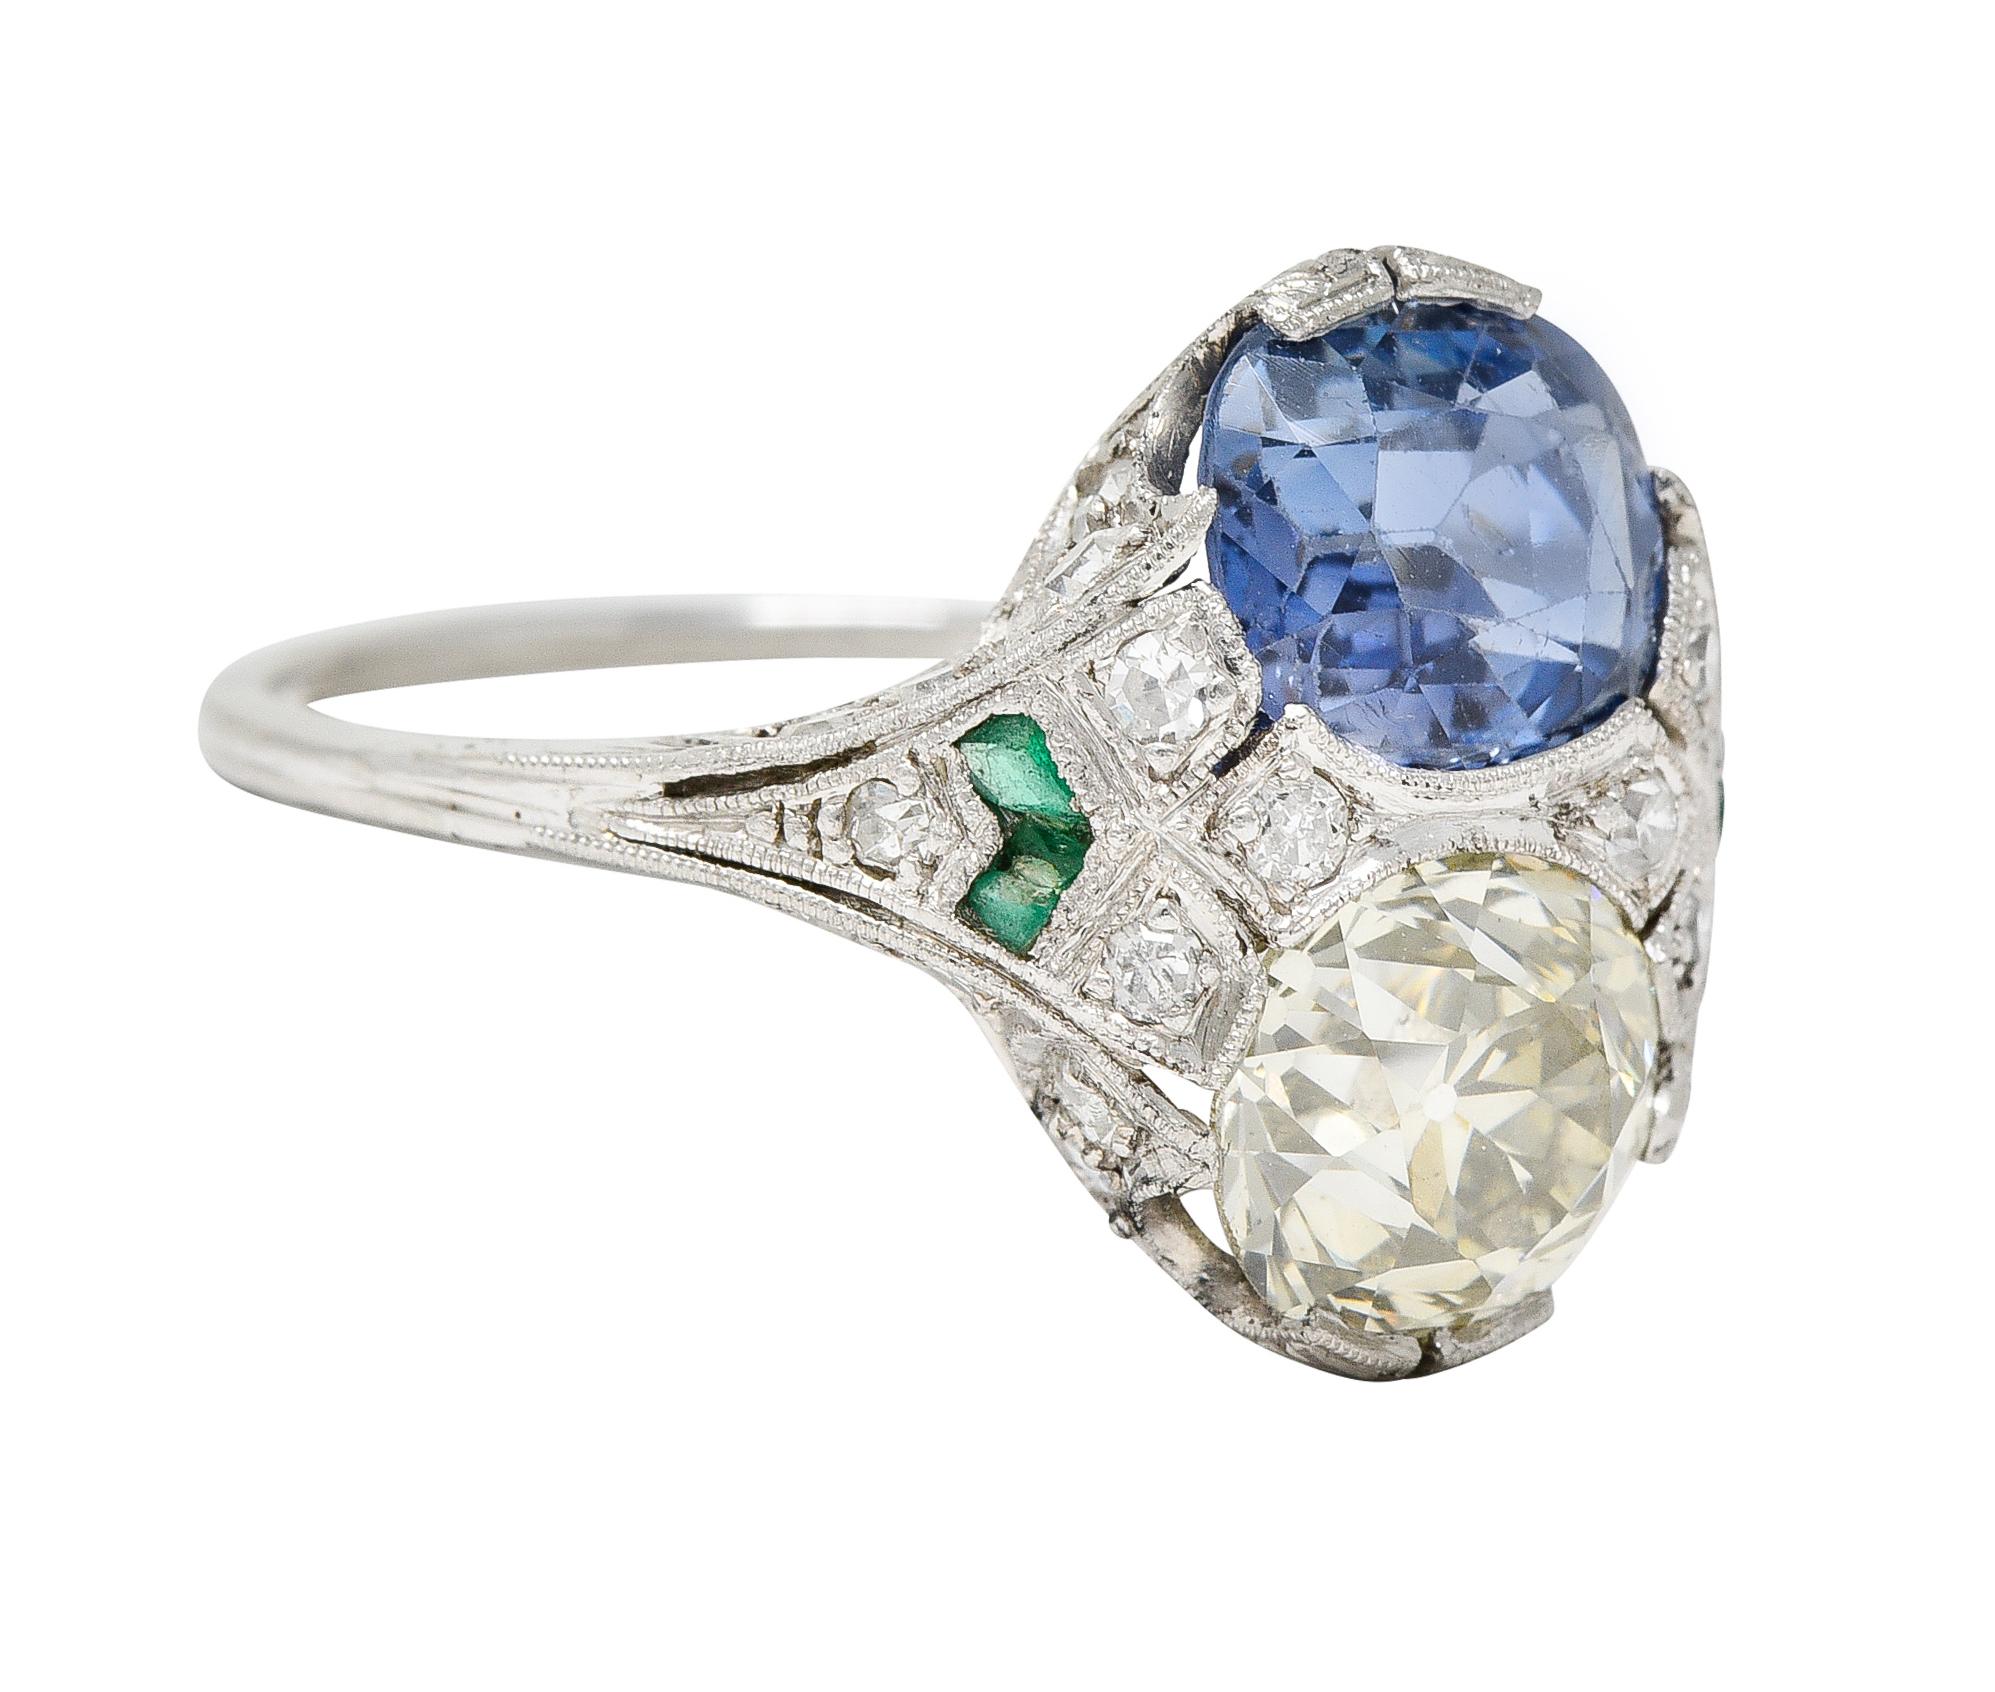 Featuring an old European cut diamond and a cushion cut sapphire set North to South toi-et-moi style
Sapphire weighs approximately 1.81 carats - transparent light violetish-blue in color
Diamond weighs 1.63 carats - Q to R in color with VS2